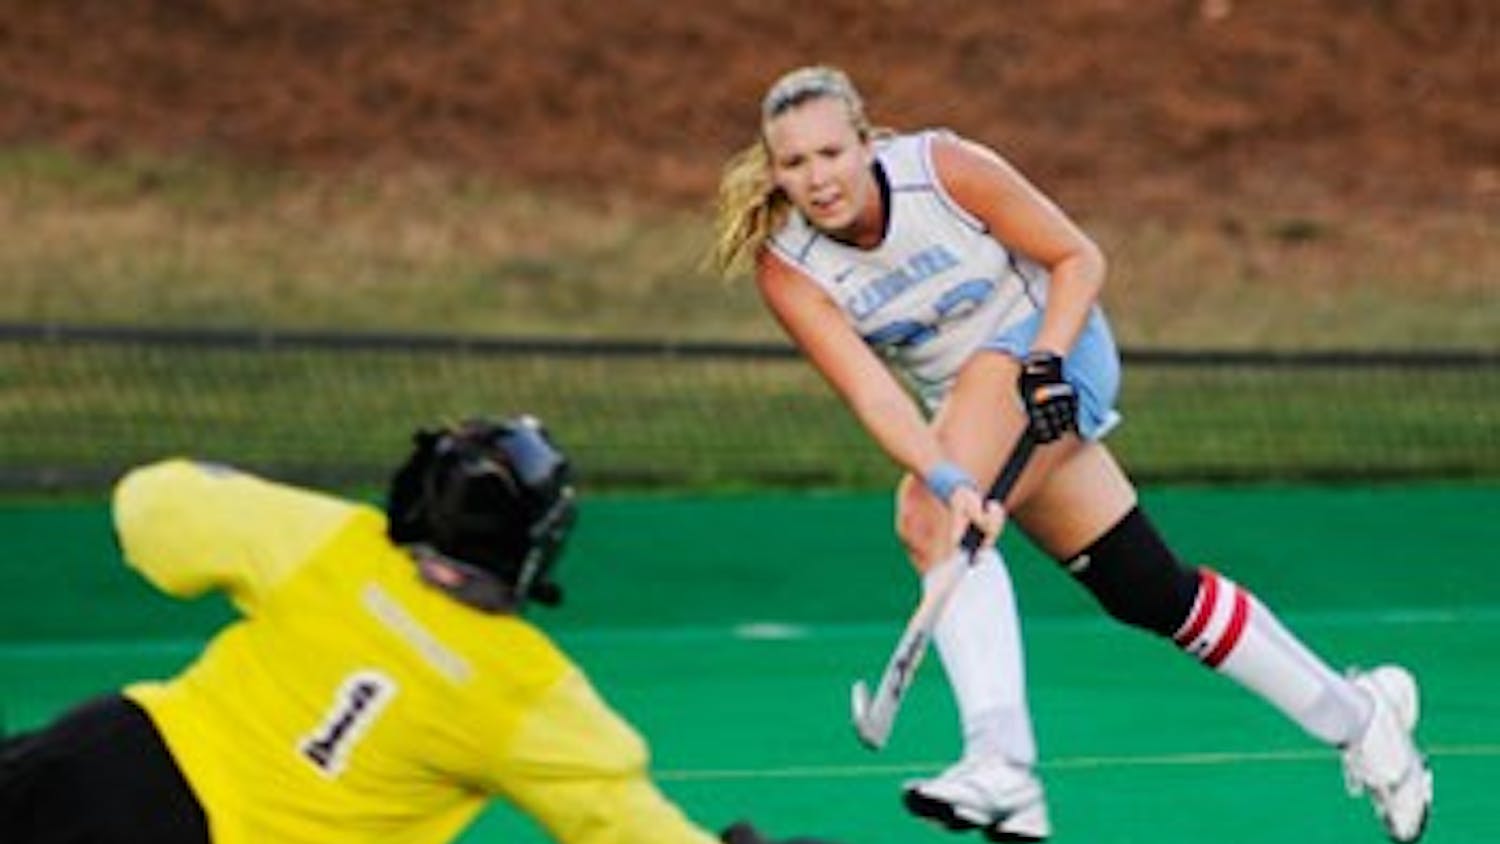 Dani Forword launches a shot during No. 4 North Carolina’s 4-1 defeat of No. 2 Wake Forest in Chapel Hill on Friday.